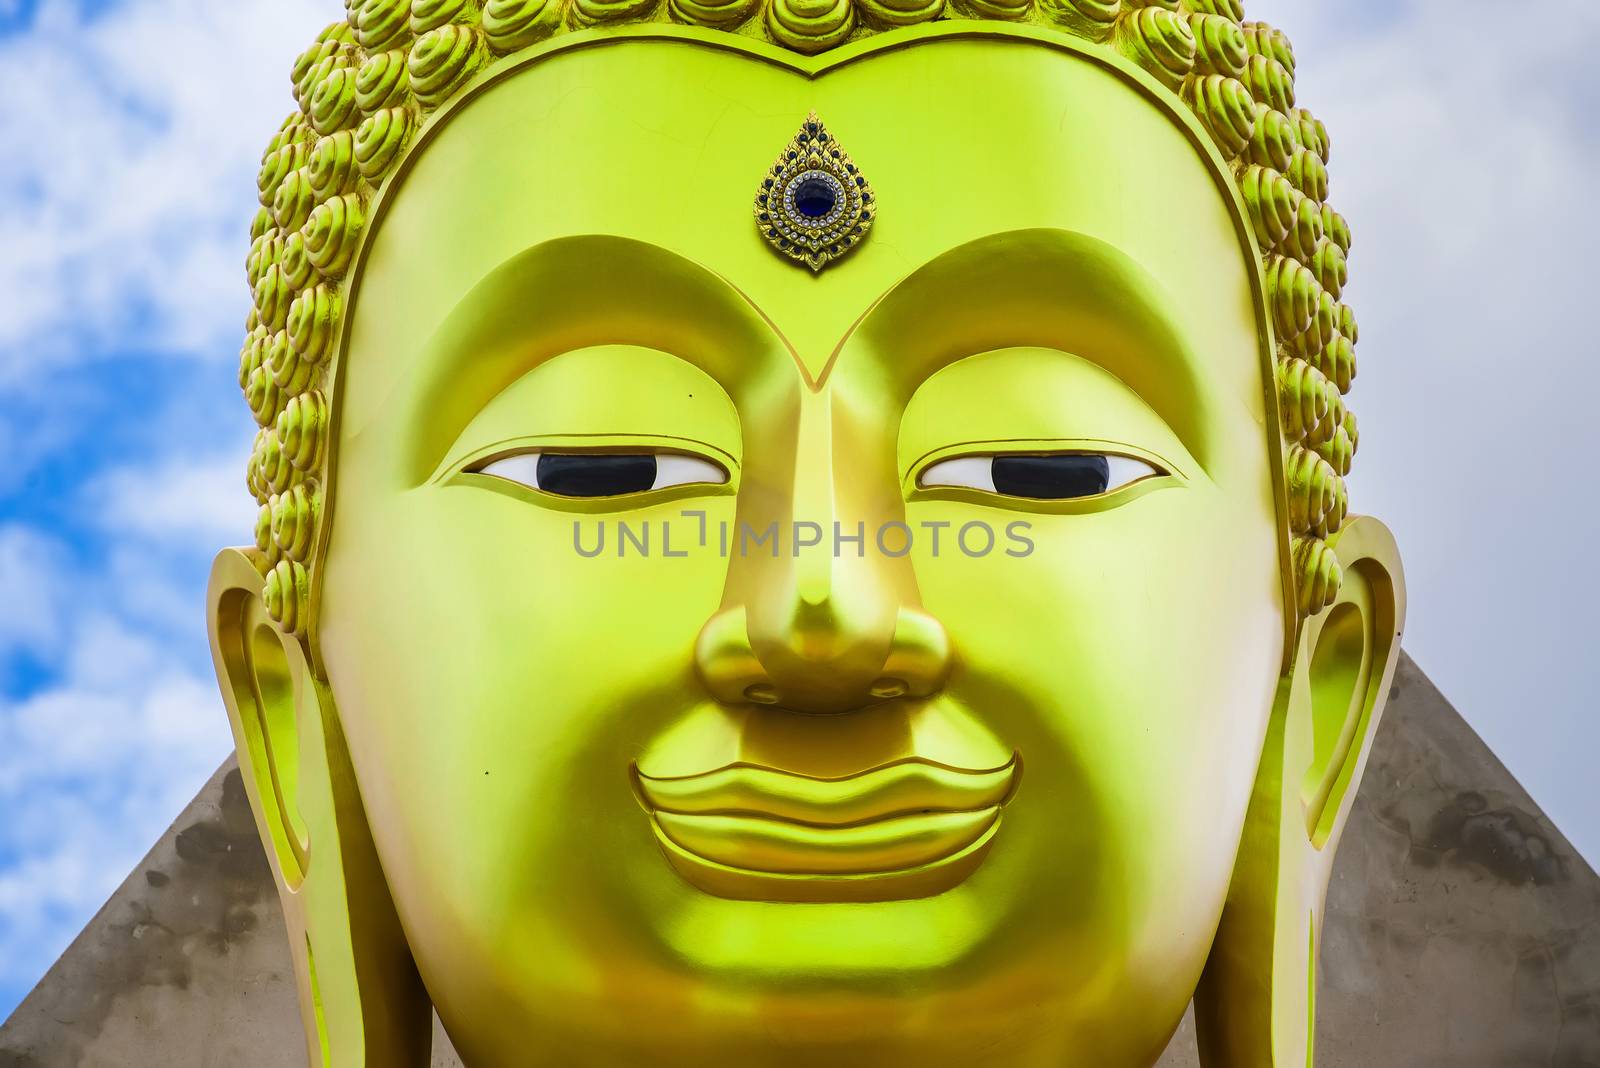 The face of Big Goldden Buddha statue of Chareon Rat Bamrung Temple (Nong Phong Nok Temple) the place of faith in Thailand